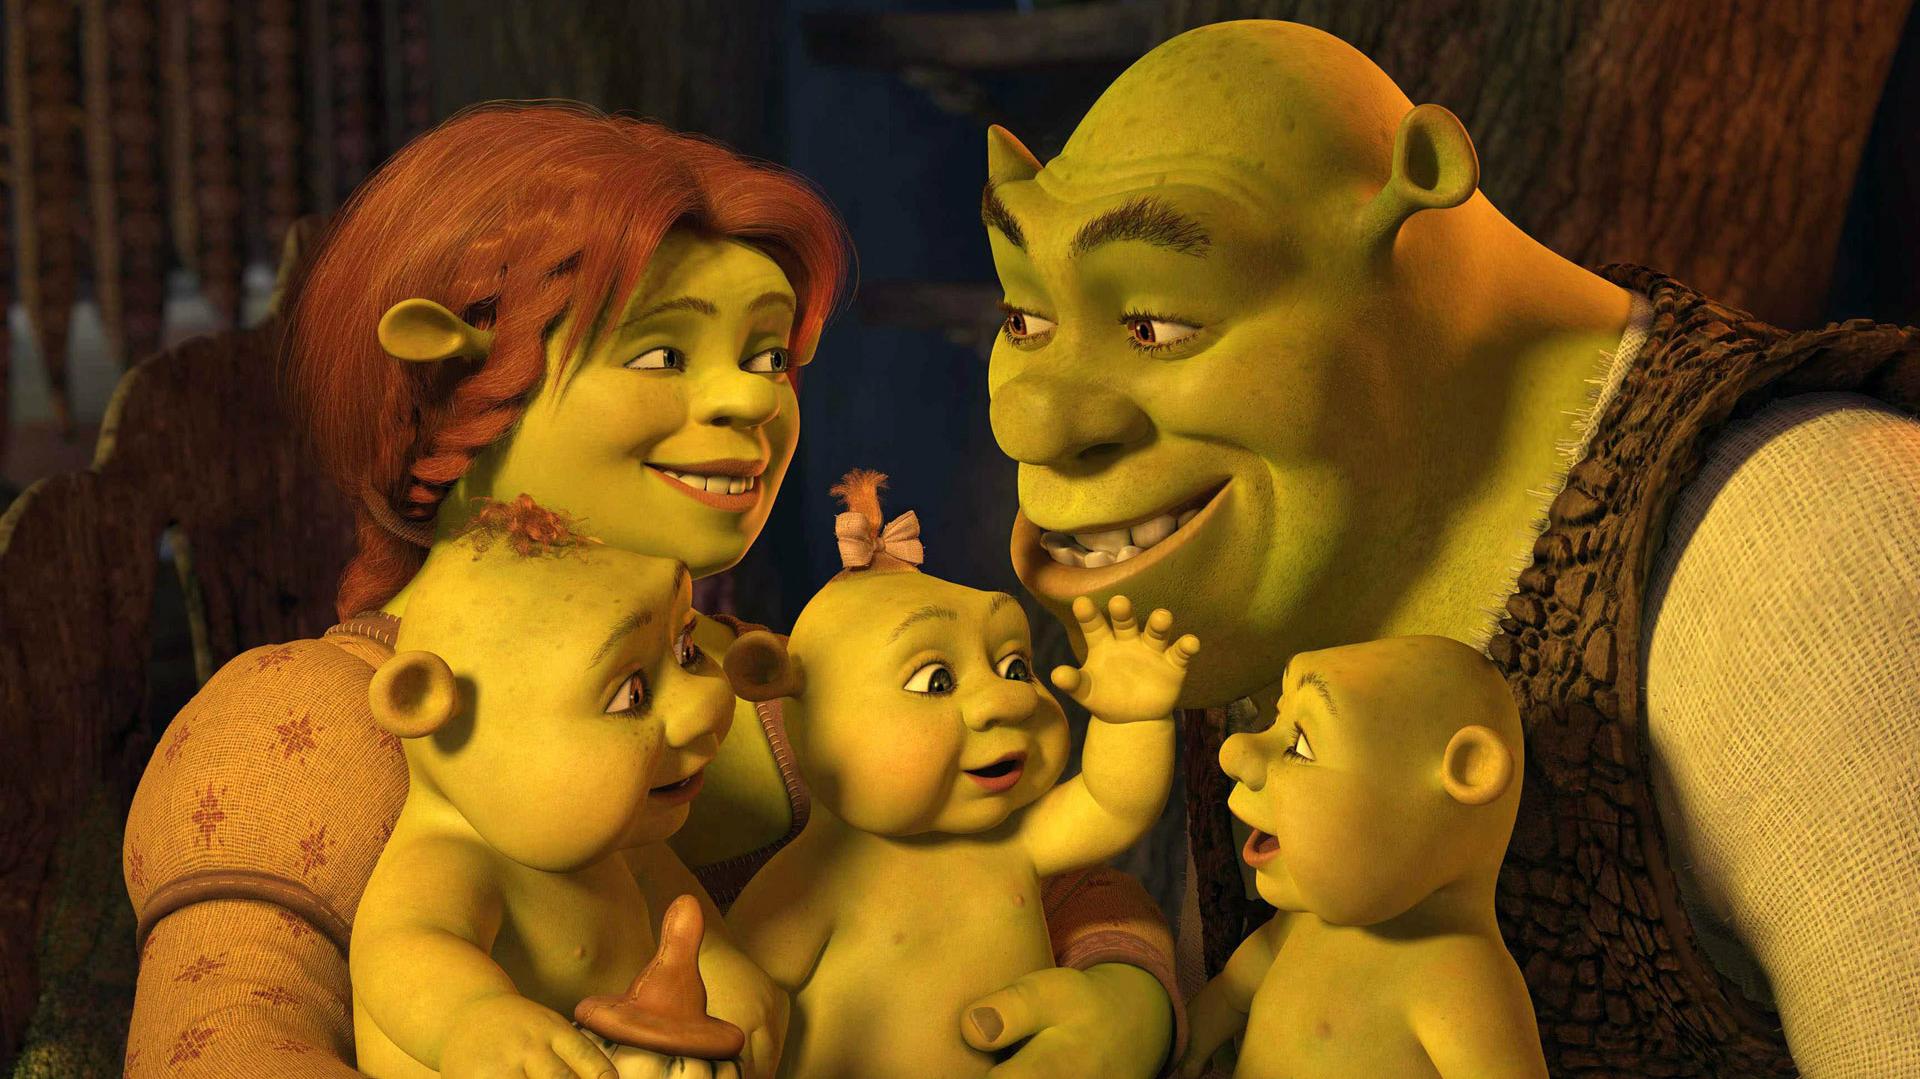 Shrek 5 is a Reboot and not Sequel